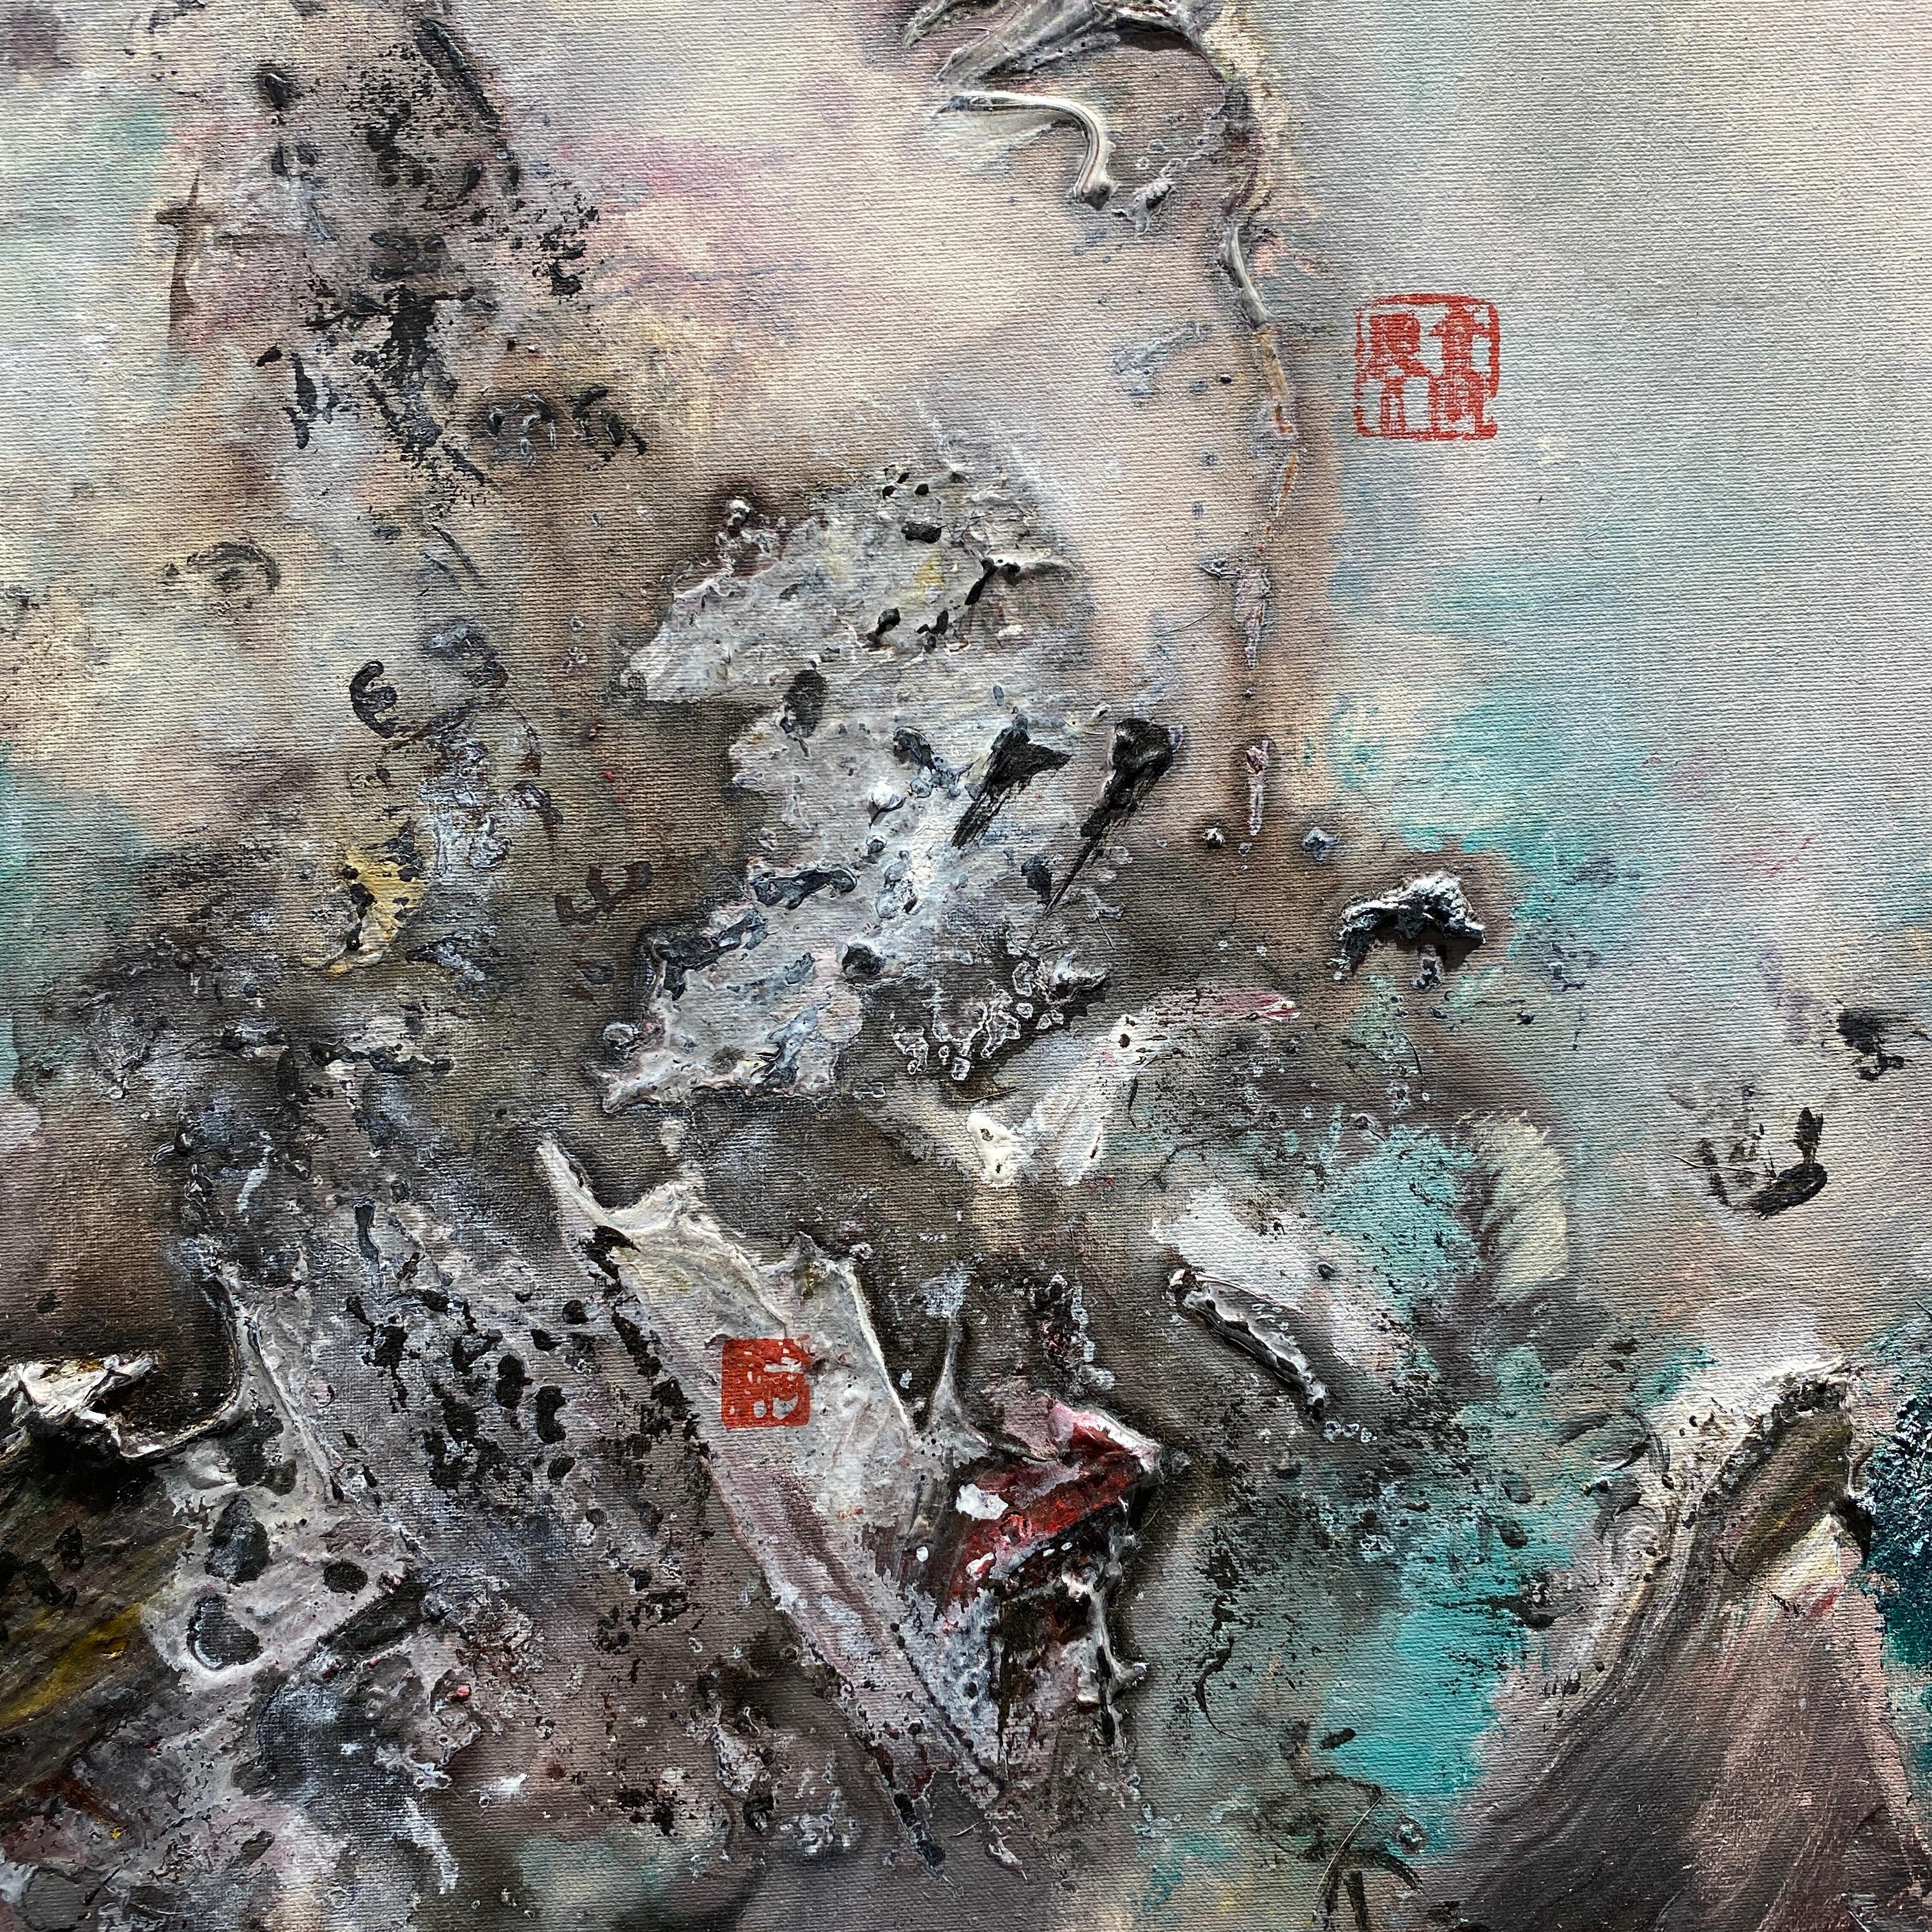 Poetic Chinese Landscape inspired by Calligraphy, abstract and conceptual style - Painting by Gao Yi